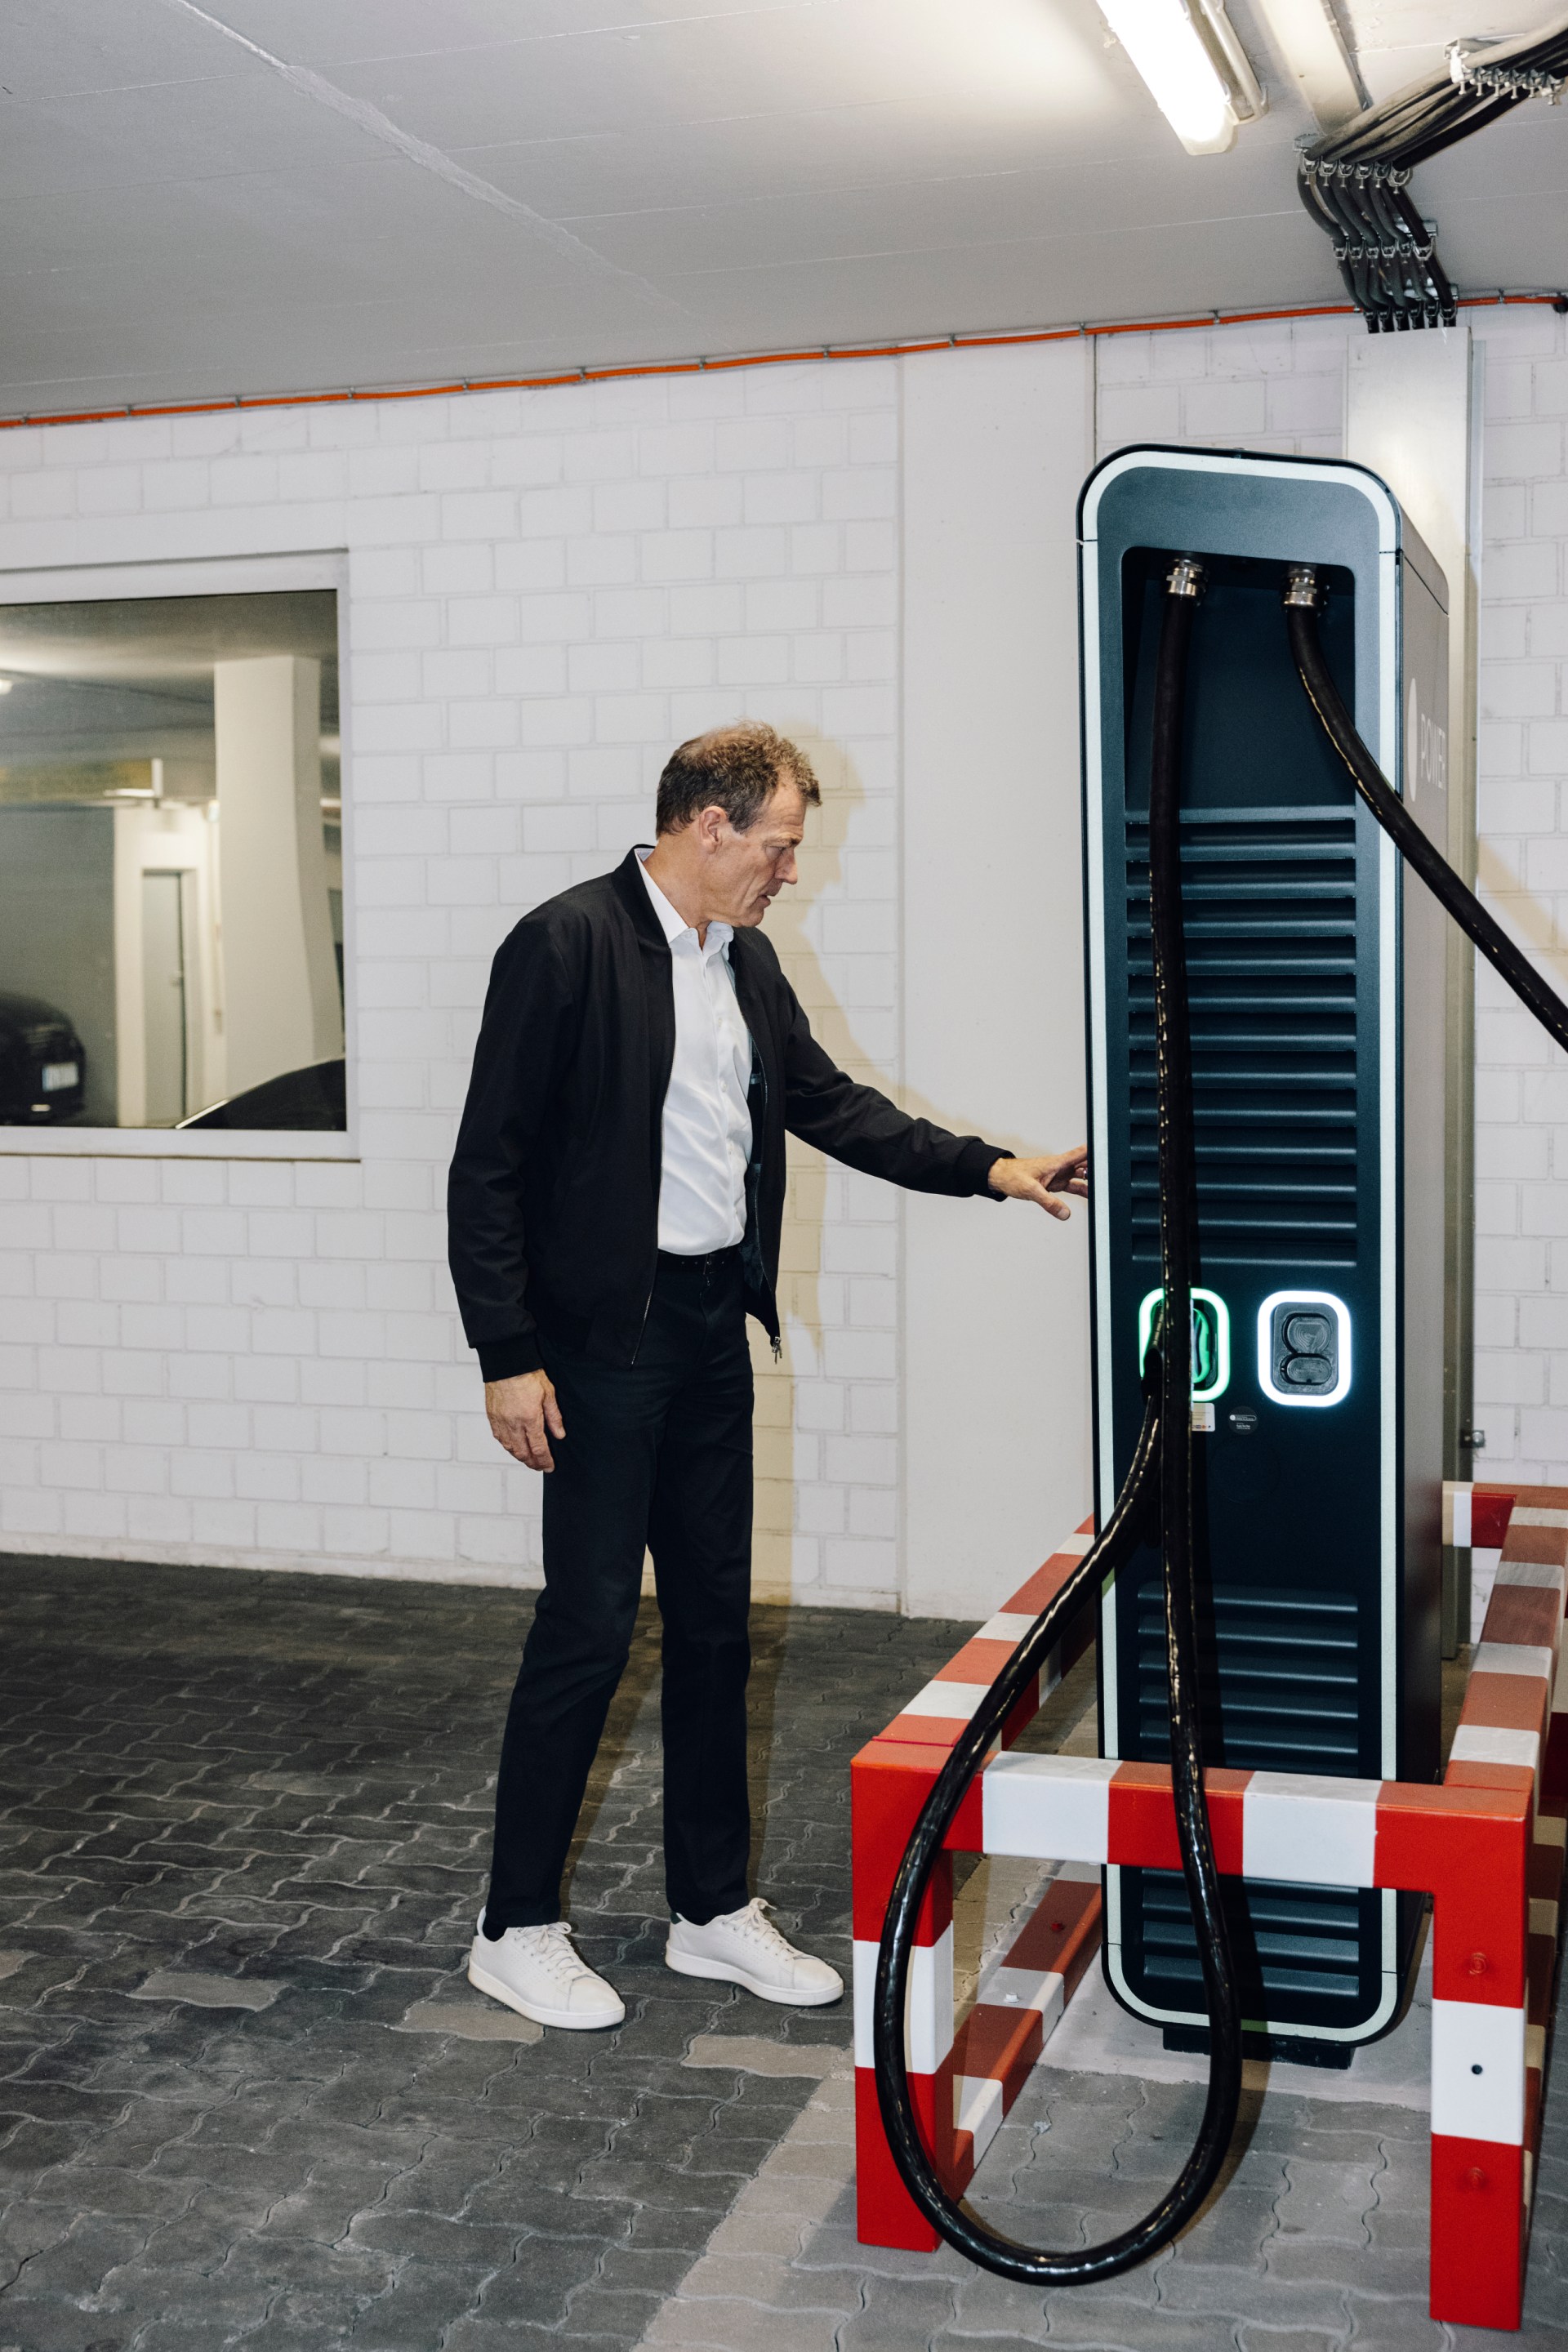 Andreas Jung operates a quick-charging station.